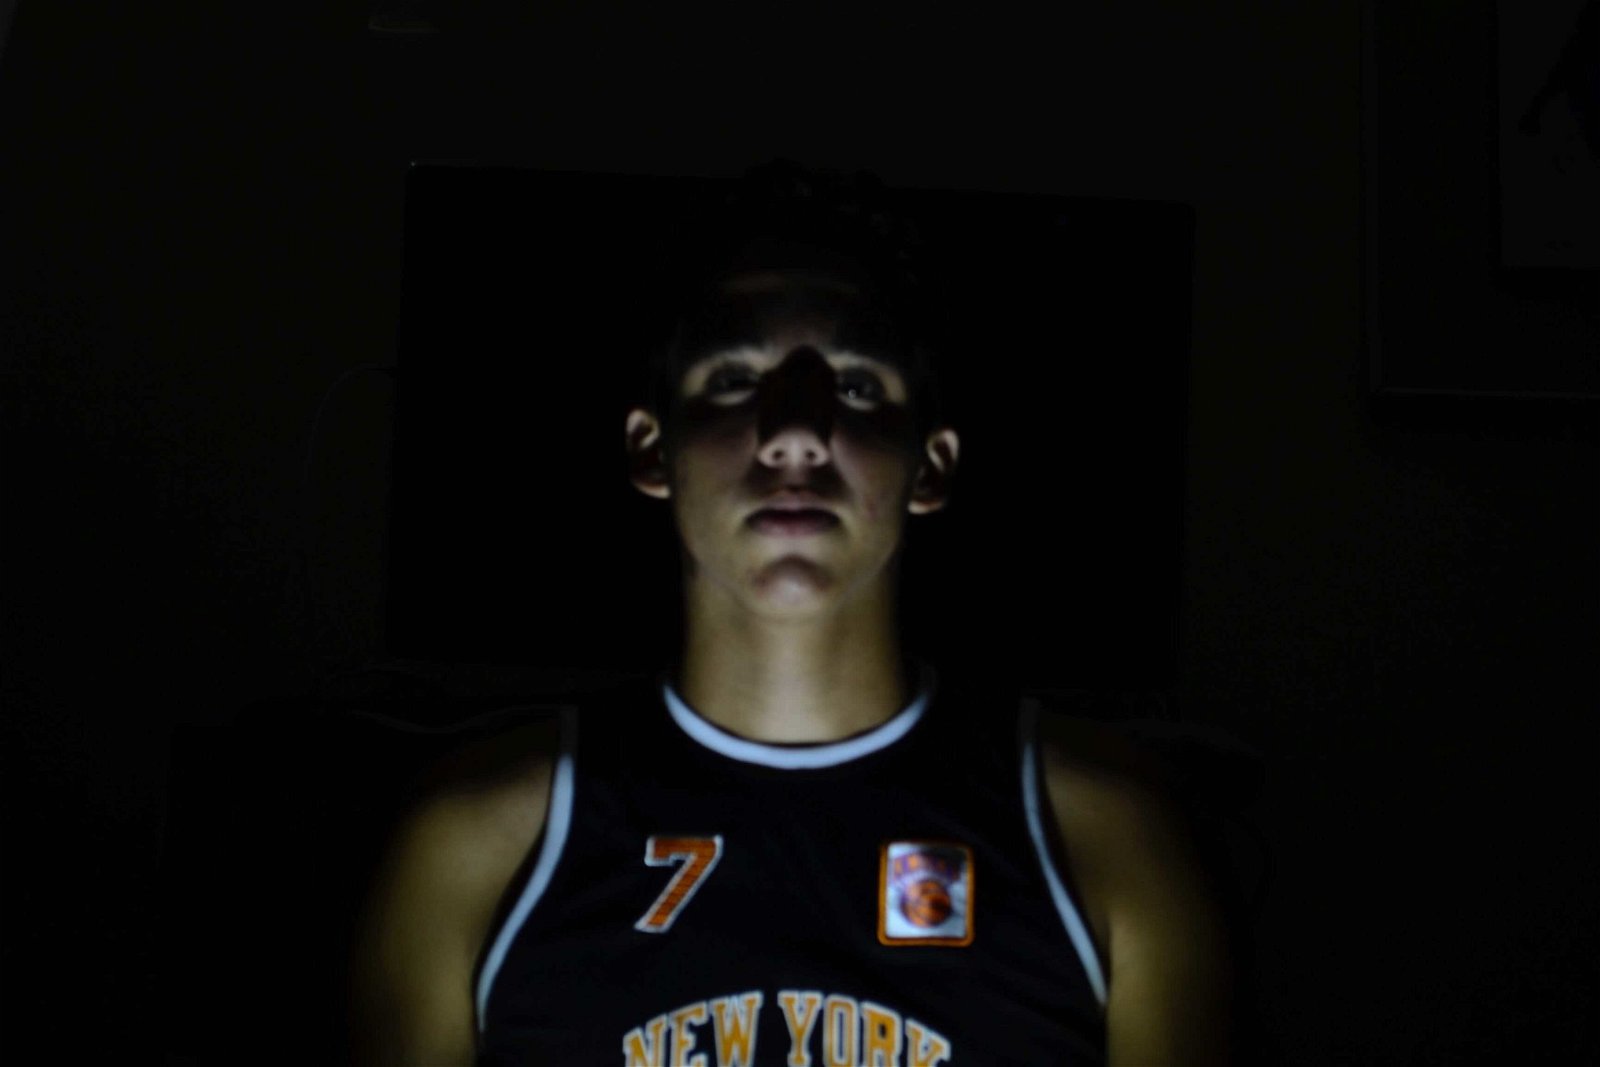 Underlighting is a portrait photography lighting technique that can create a heroic image--as seen in this photo of a basketball player--or a villainous image by lighting the subject from underneath